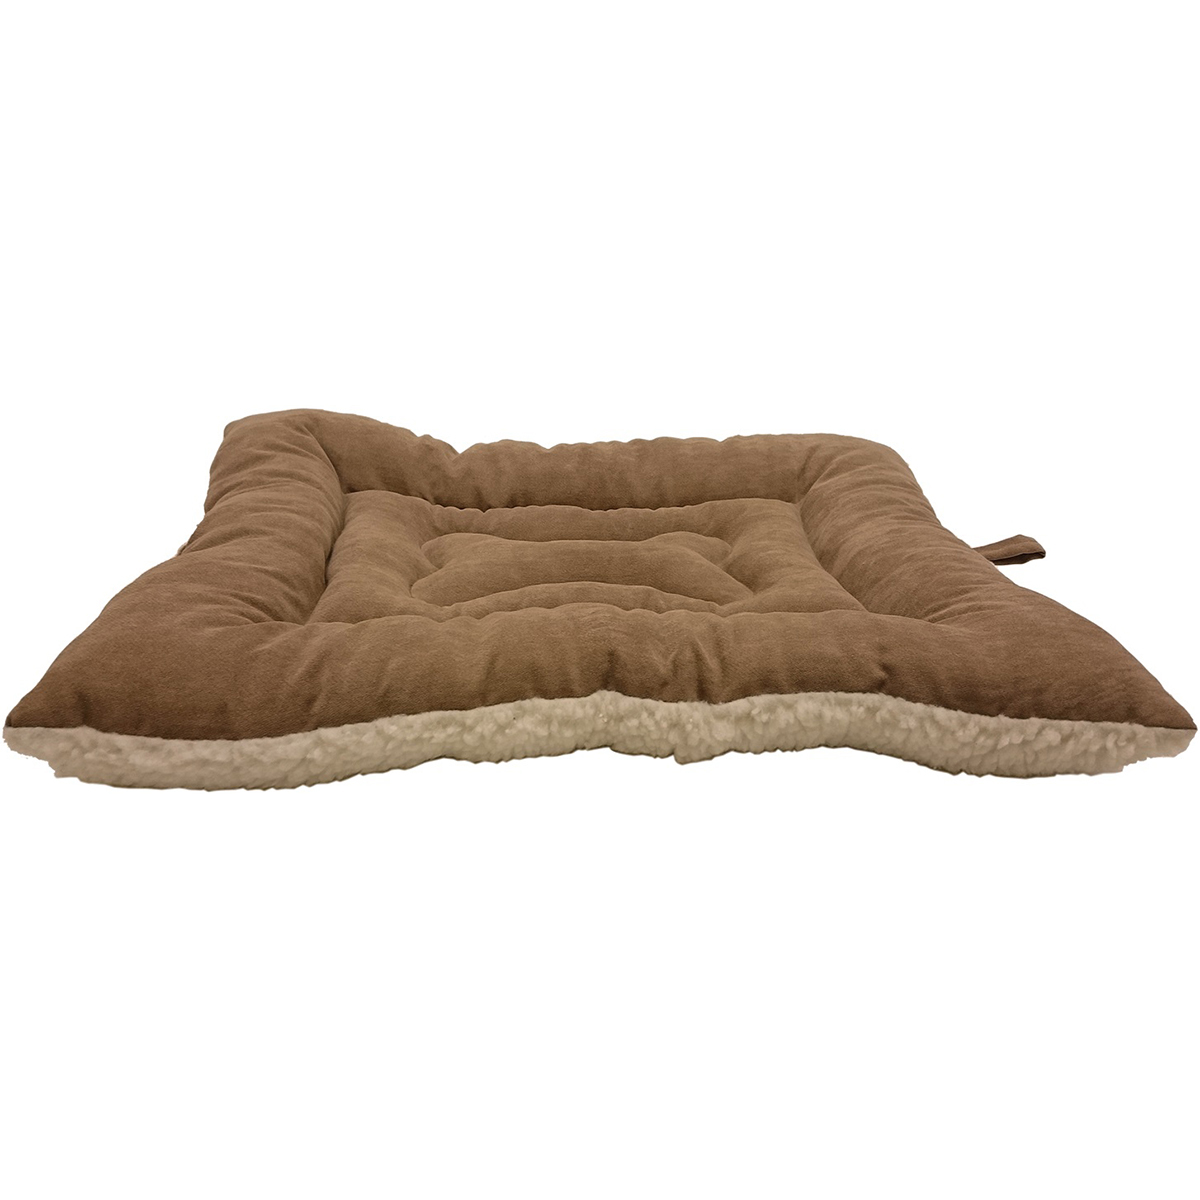 32868 37 In. Sleep Zone Fashion Bed & Crate Mat Caramel